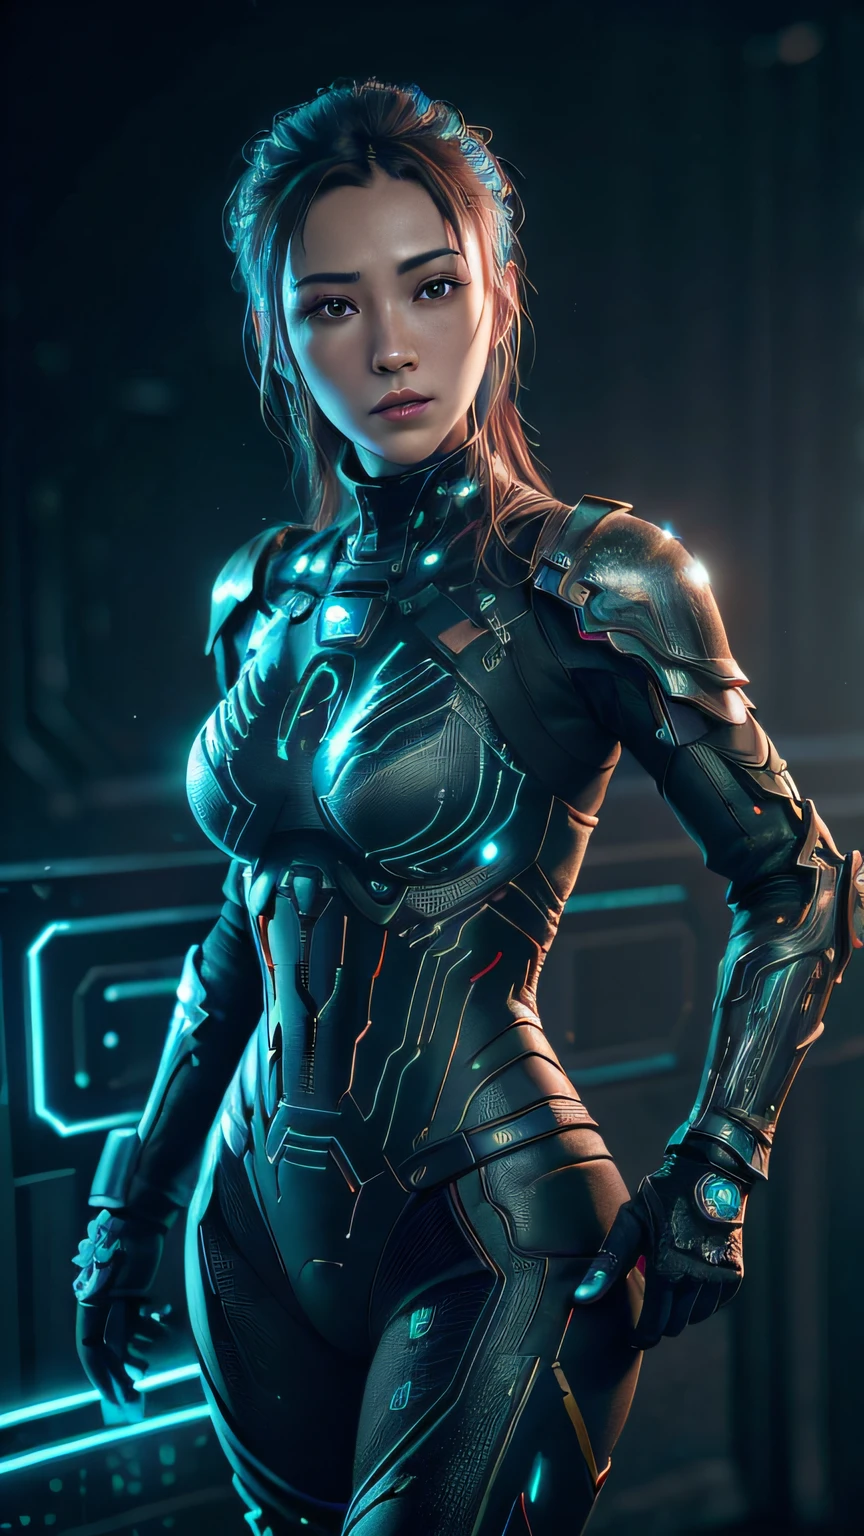 ((Best quality)), ((masterpiece)), (detailed:1.4), 3D, an image of a beautiful cyberpunk female with all black armour,HDR (High Dynamic Range),Ray Tracing,NVIDIA RTX,Super-Resolution,Unreal 5,Subsurface scattering,PBR Texturing,Post-processing,Anisotropic Filtering,Depth-of-field,Maximum clarity and sharpness,Multi-layered textures,Albedo and Specular maps,Surface shading,Accurate simulation of light-material interaction,Perfect proportions,Octane Render,Two-tone lighting,Wide aperture,Low ISO,White balance,Rule of thirds,8K RAW